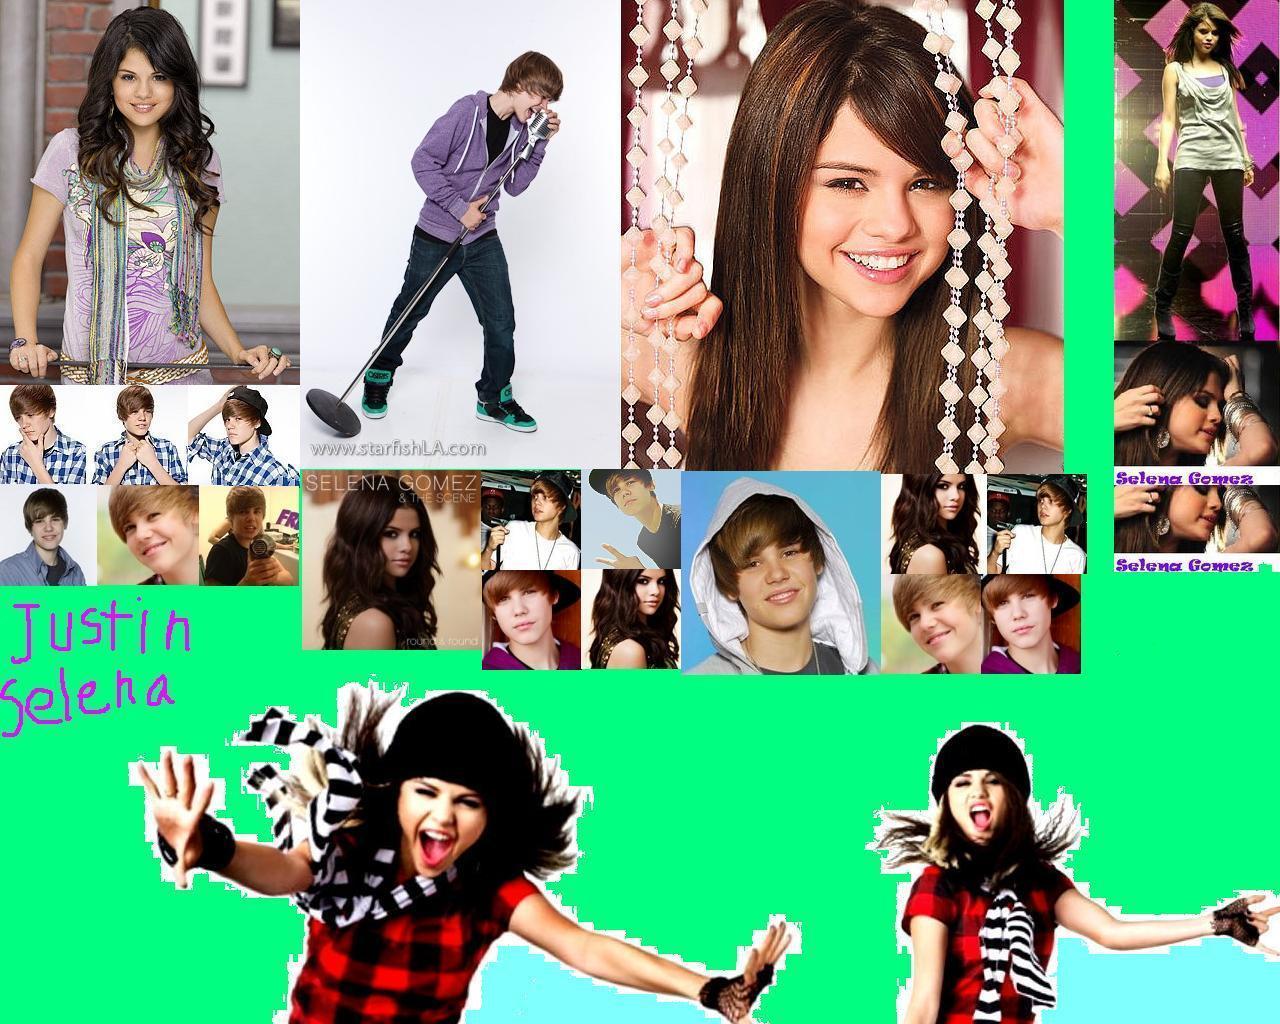 All About Football Wallpaper Justin Bieber And Selena Gomez